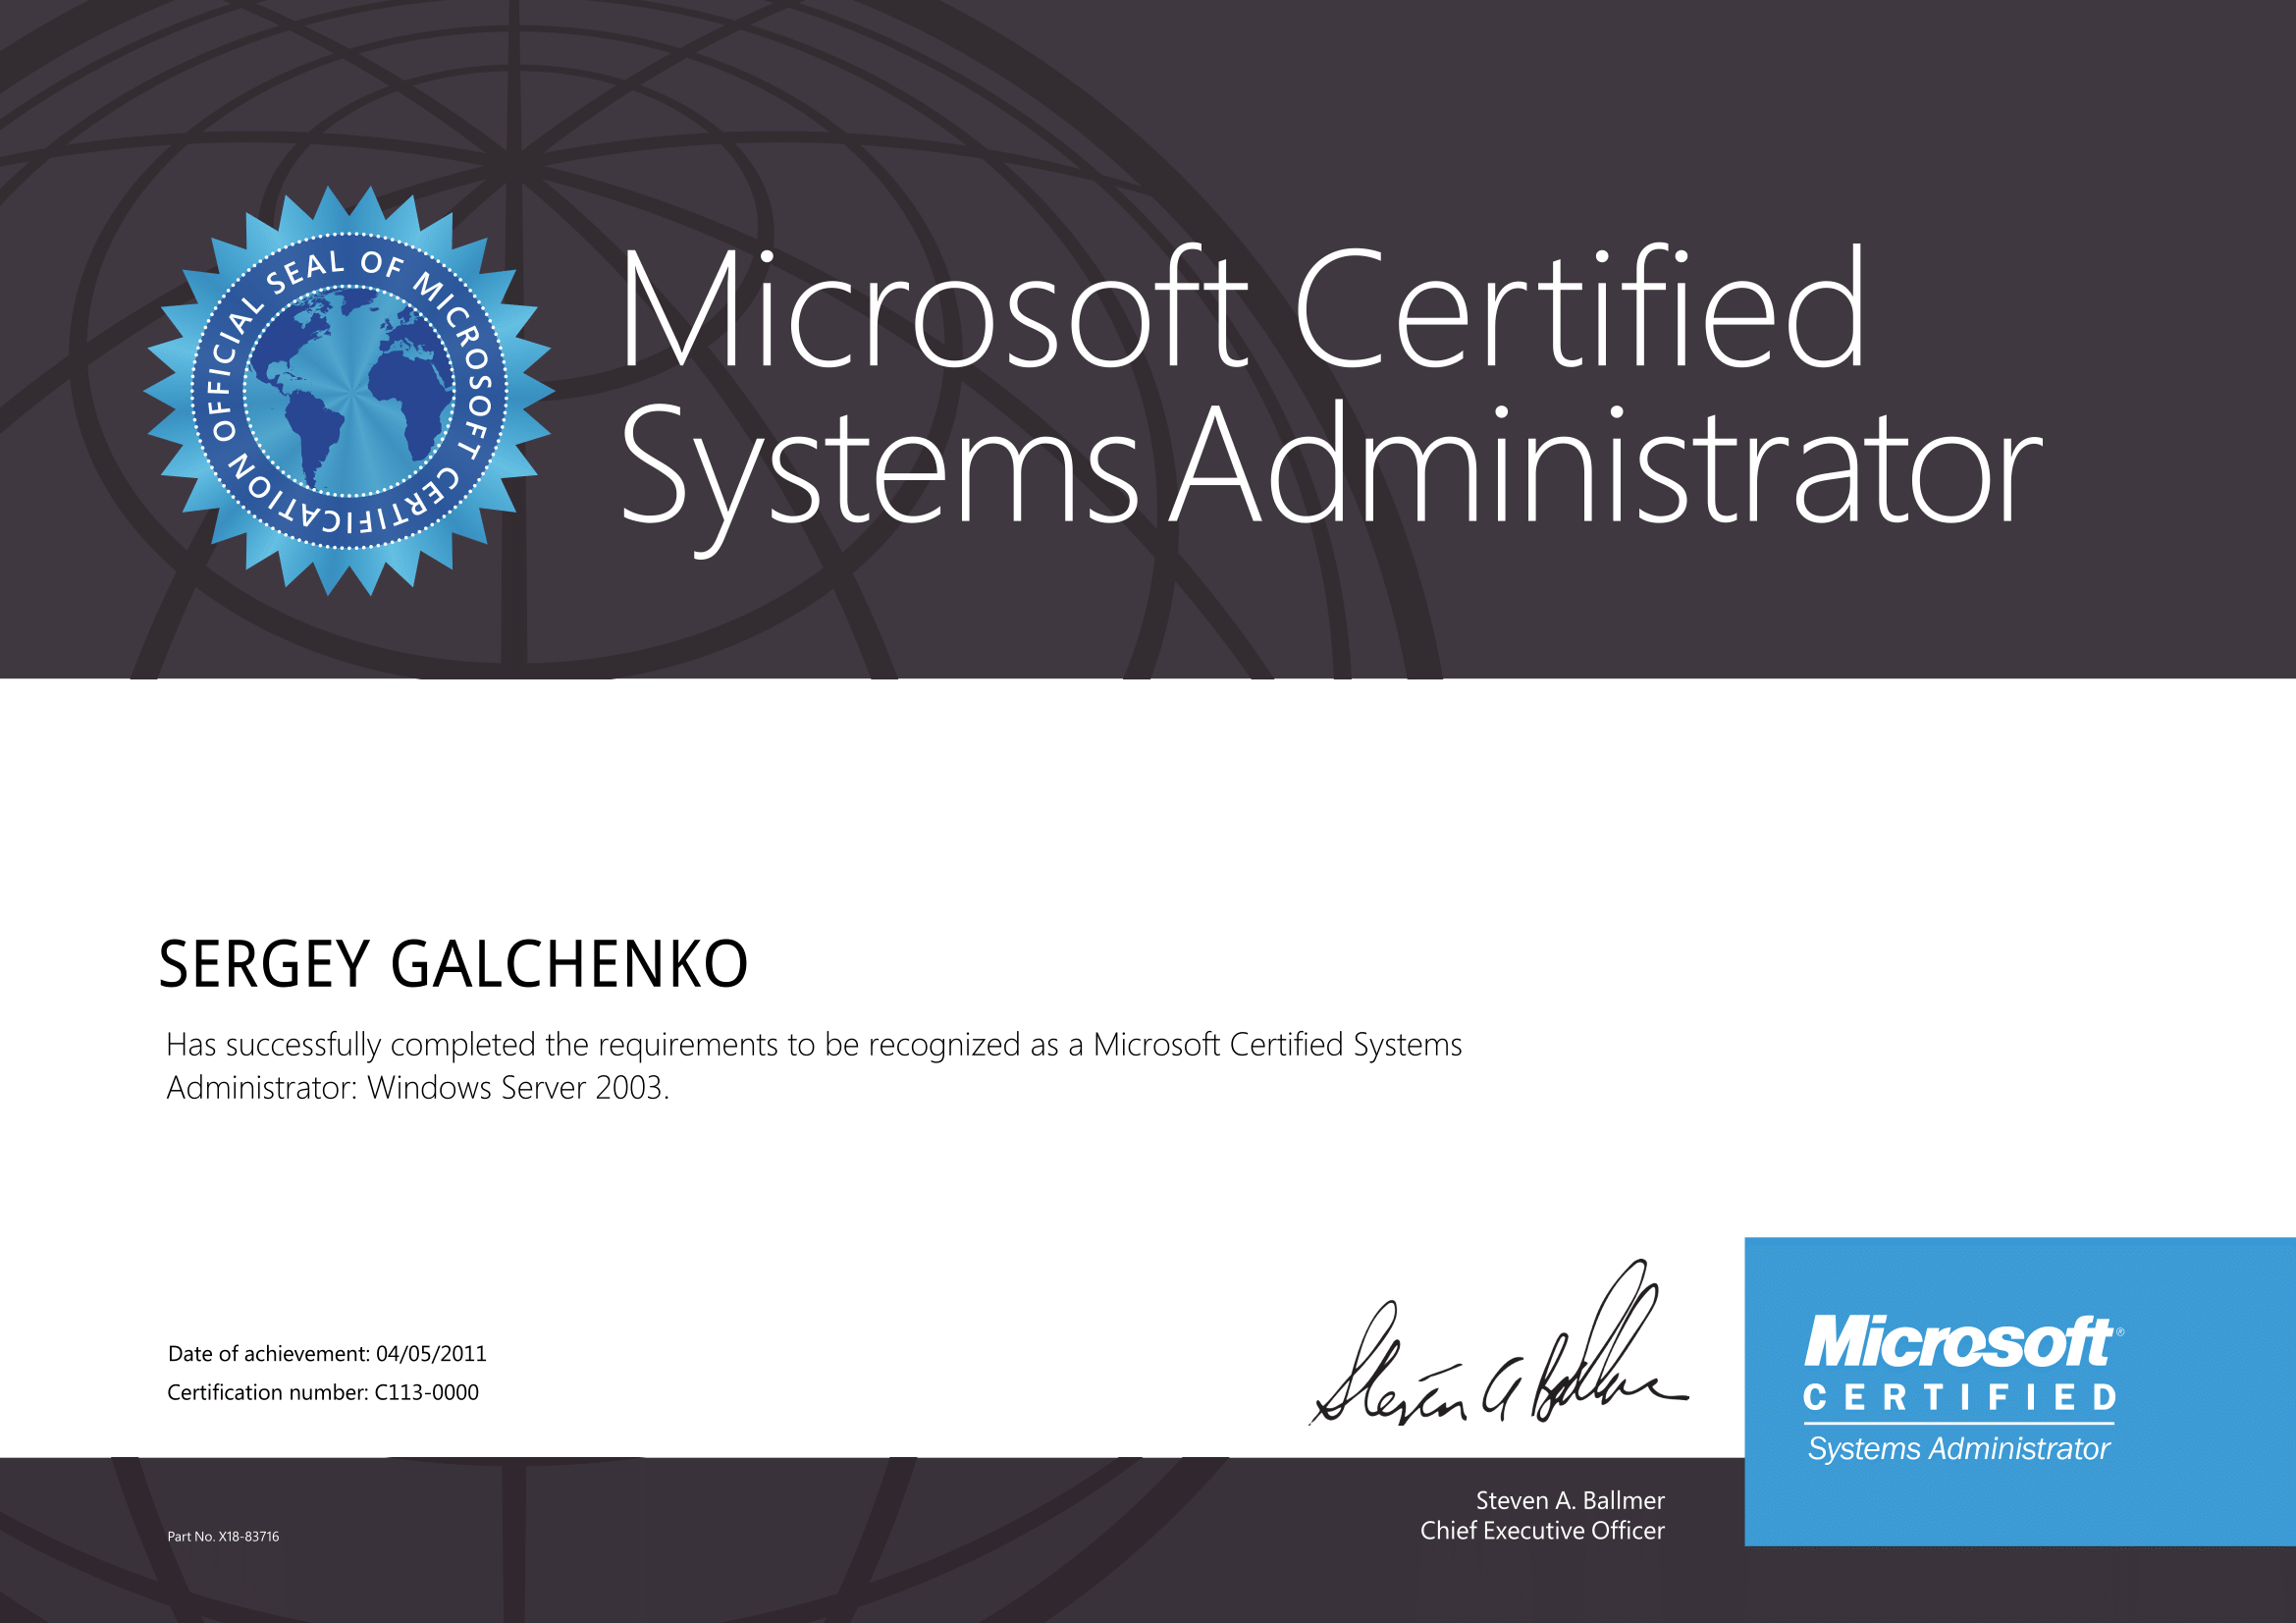 Microsoft certified systems administrator jobs